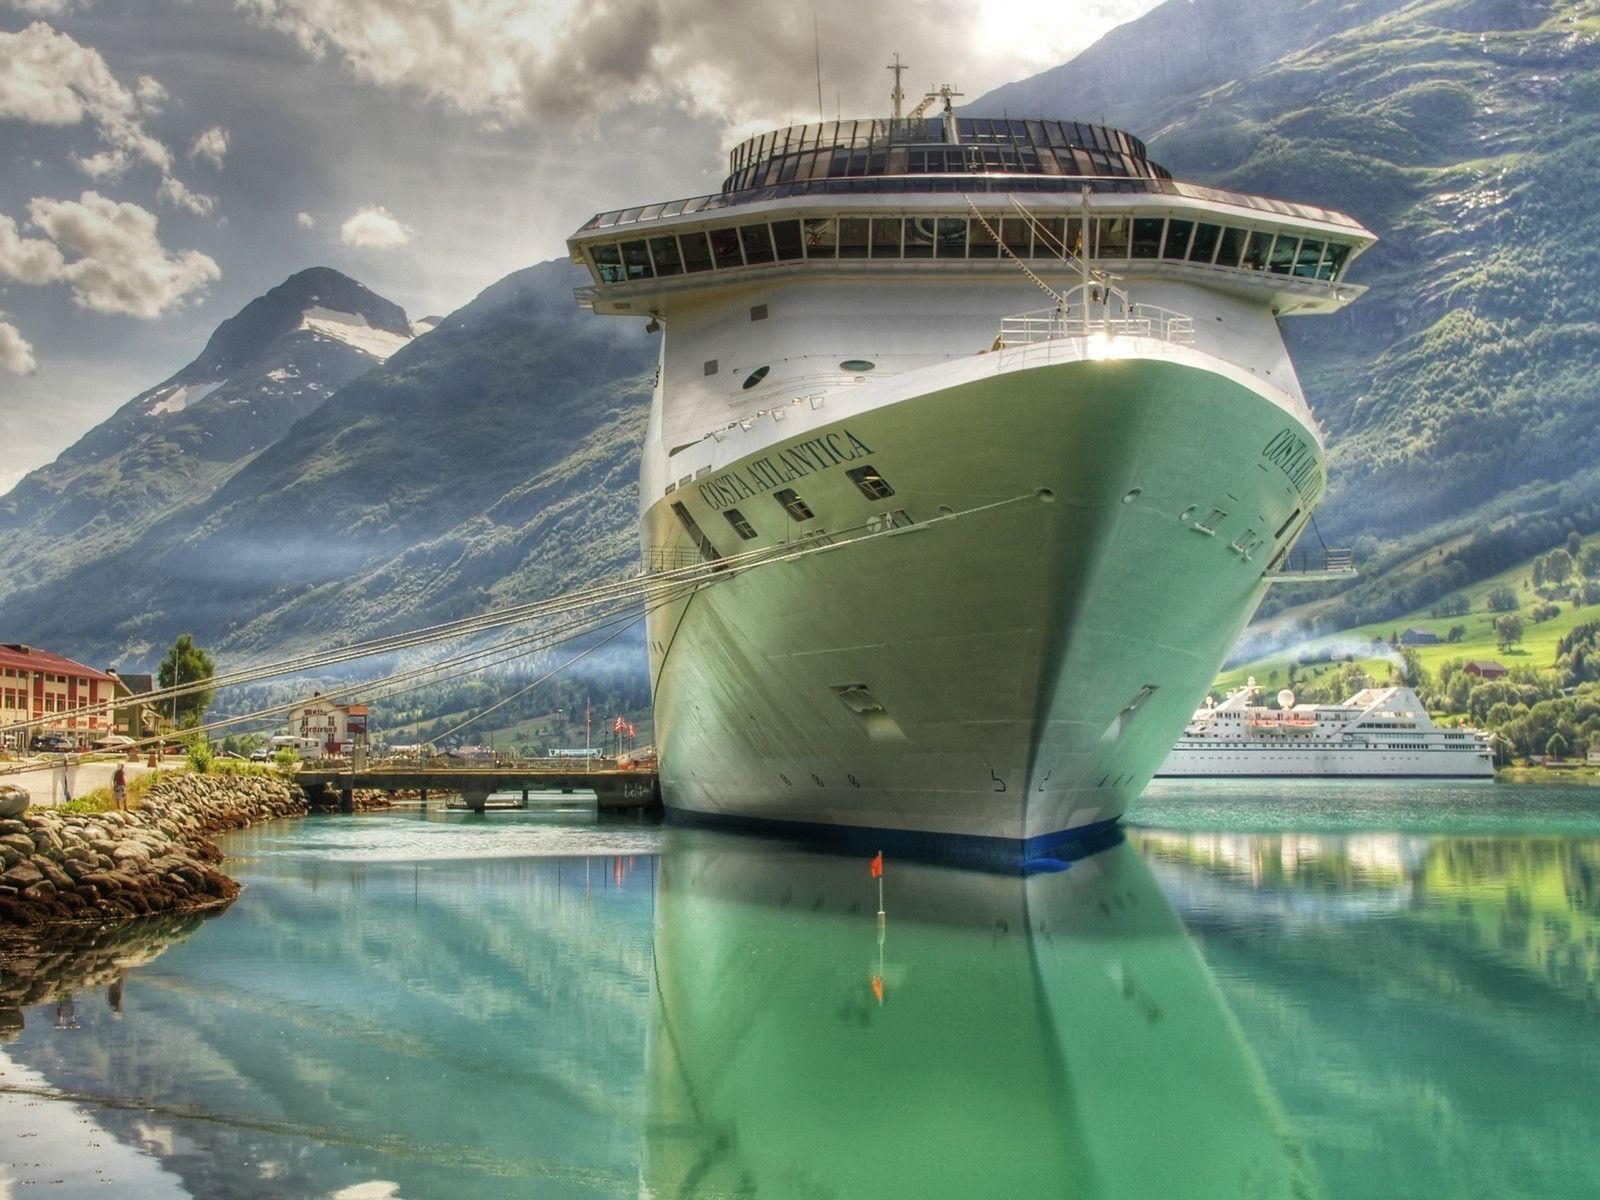 Cruise ships best wallpapers